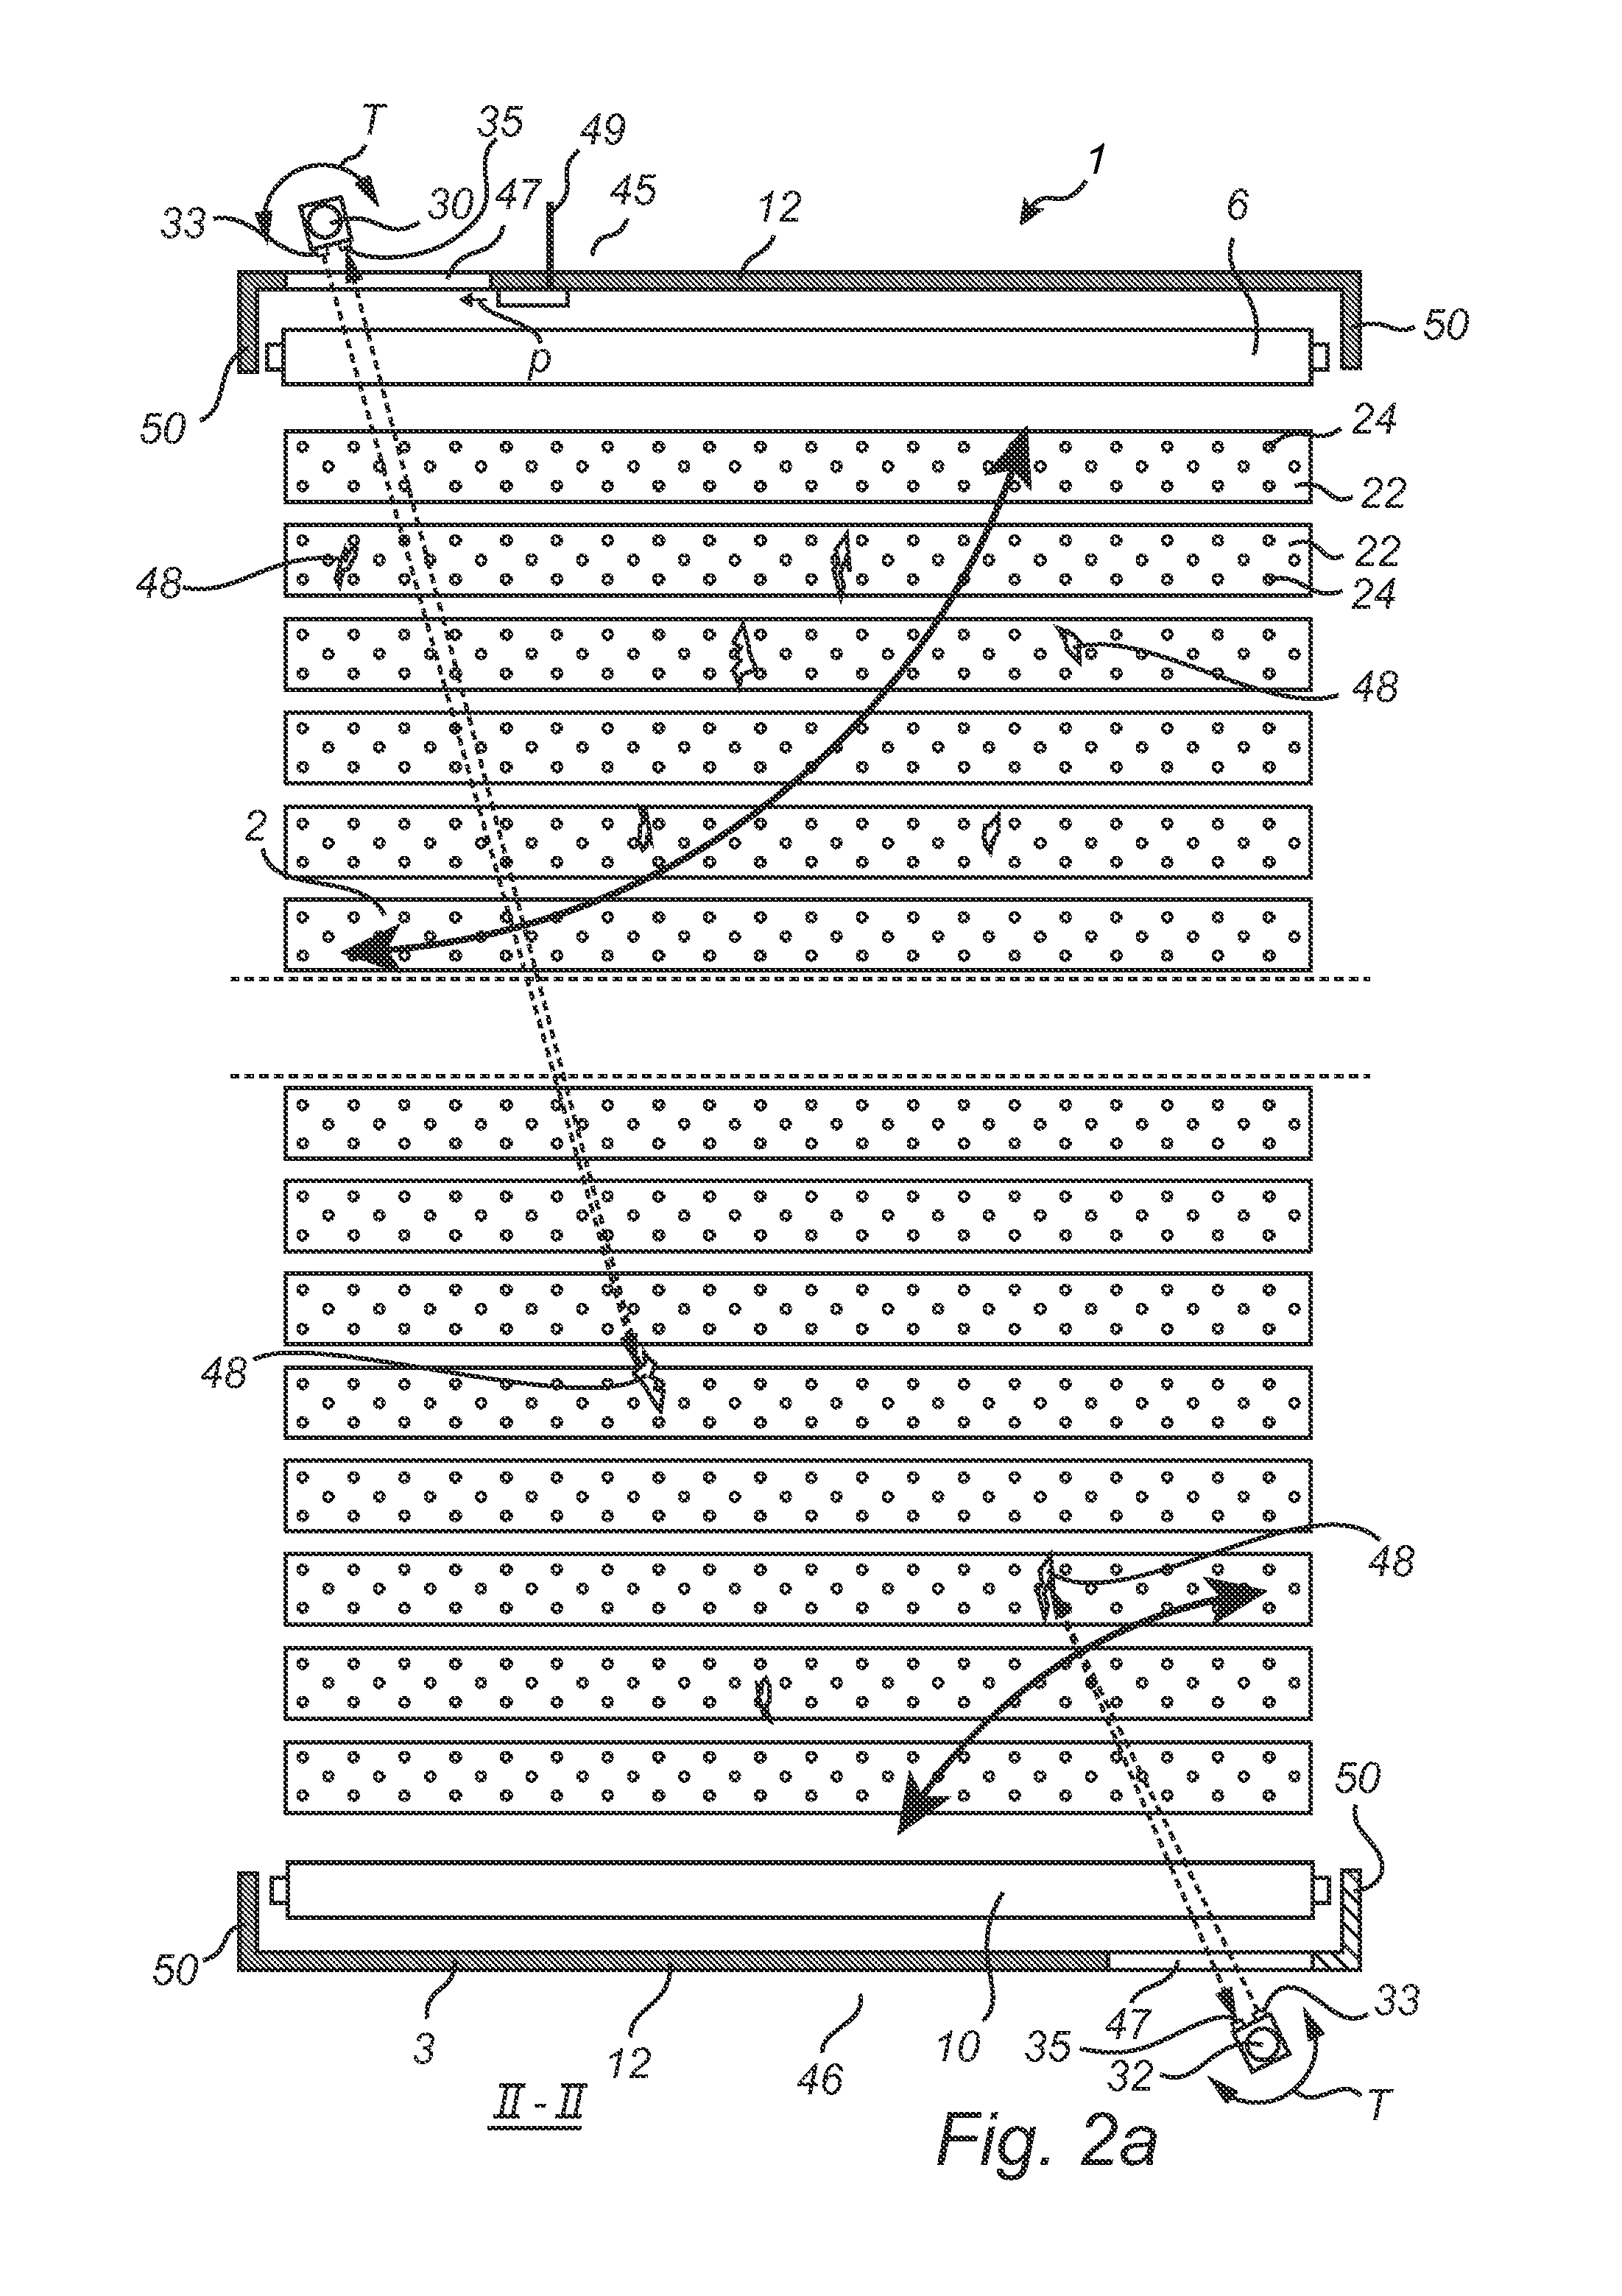 Method for drying a cellulose pulp web and a cellulose pulp dryer comprising an inspection device for inspecting the position of the web or the occurrence of web residue